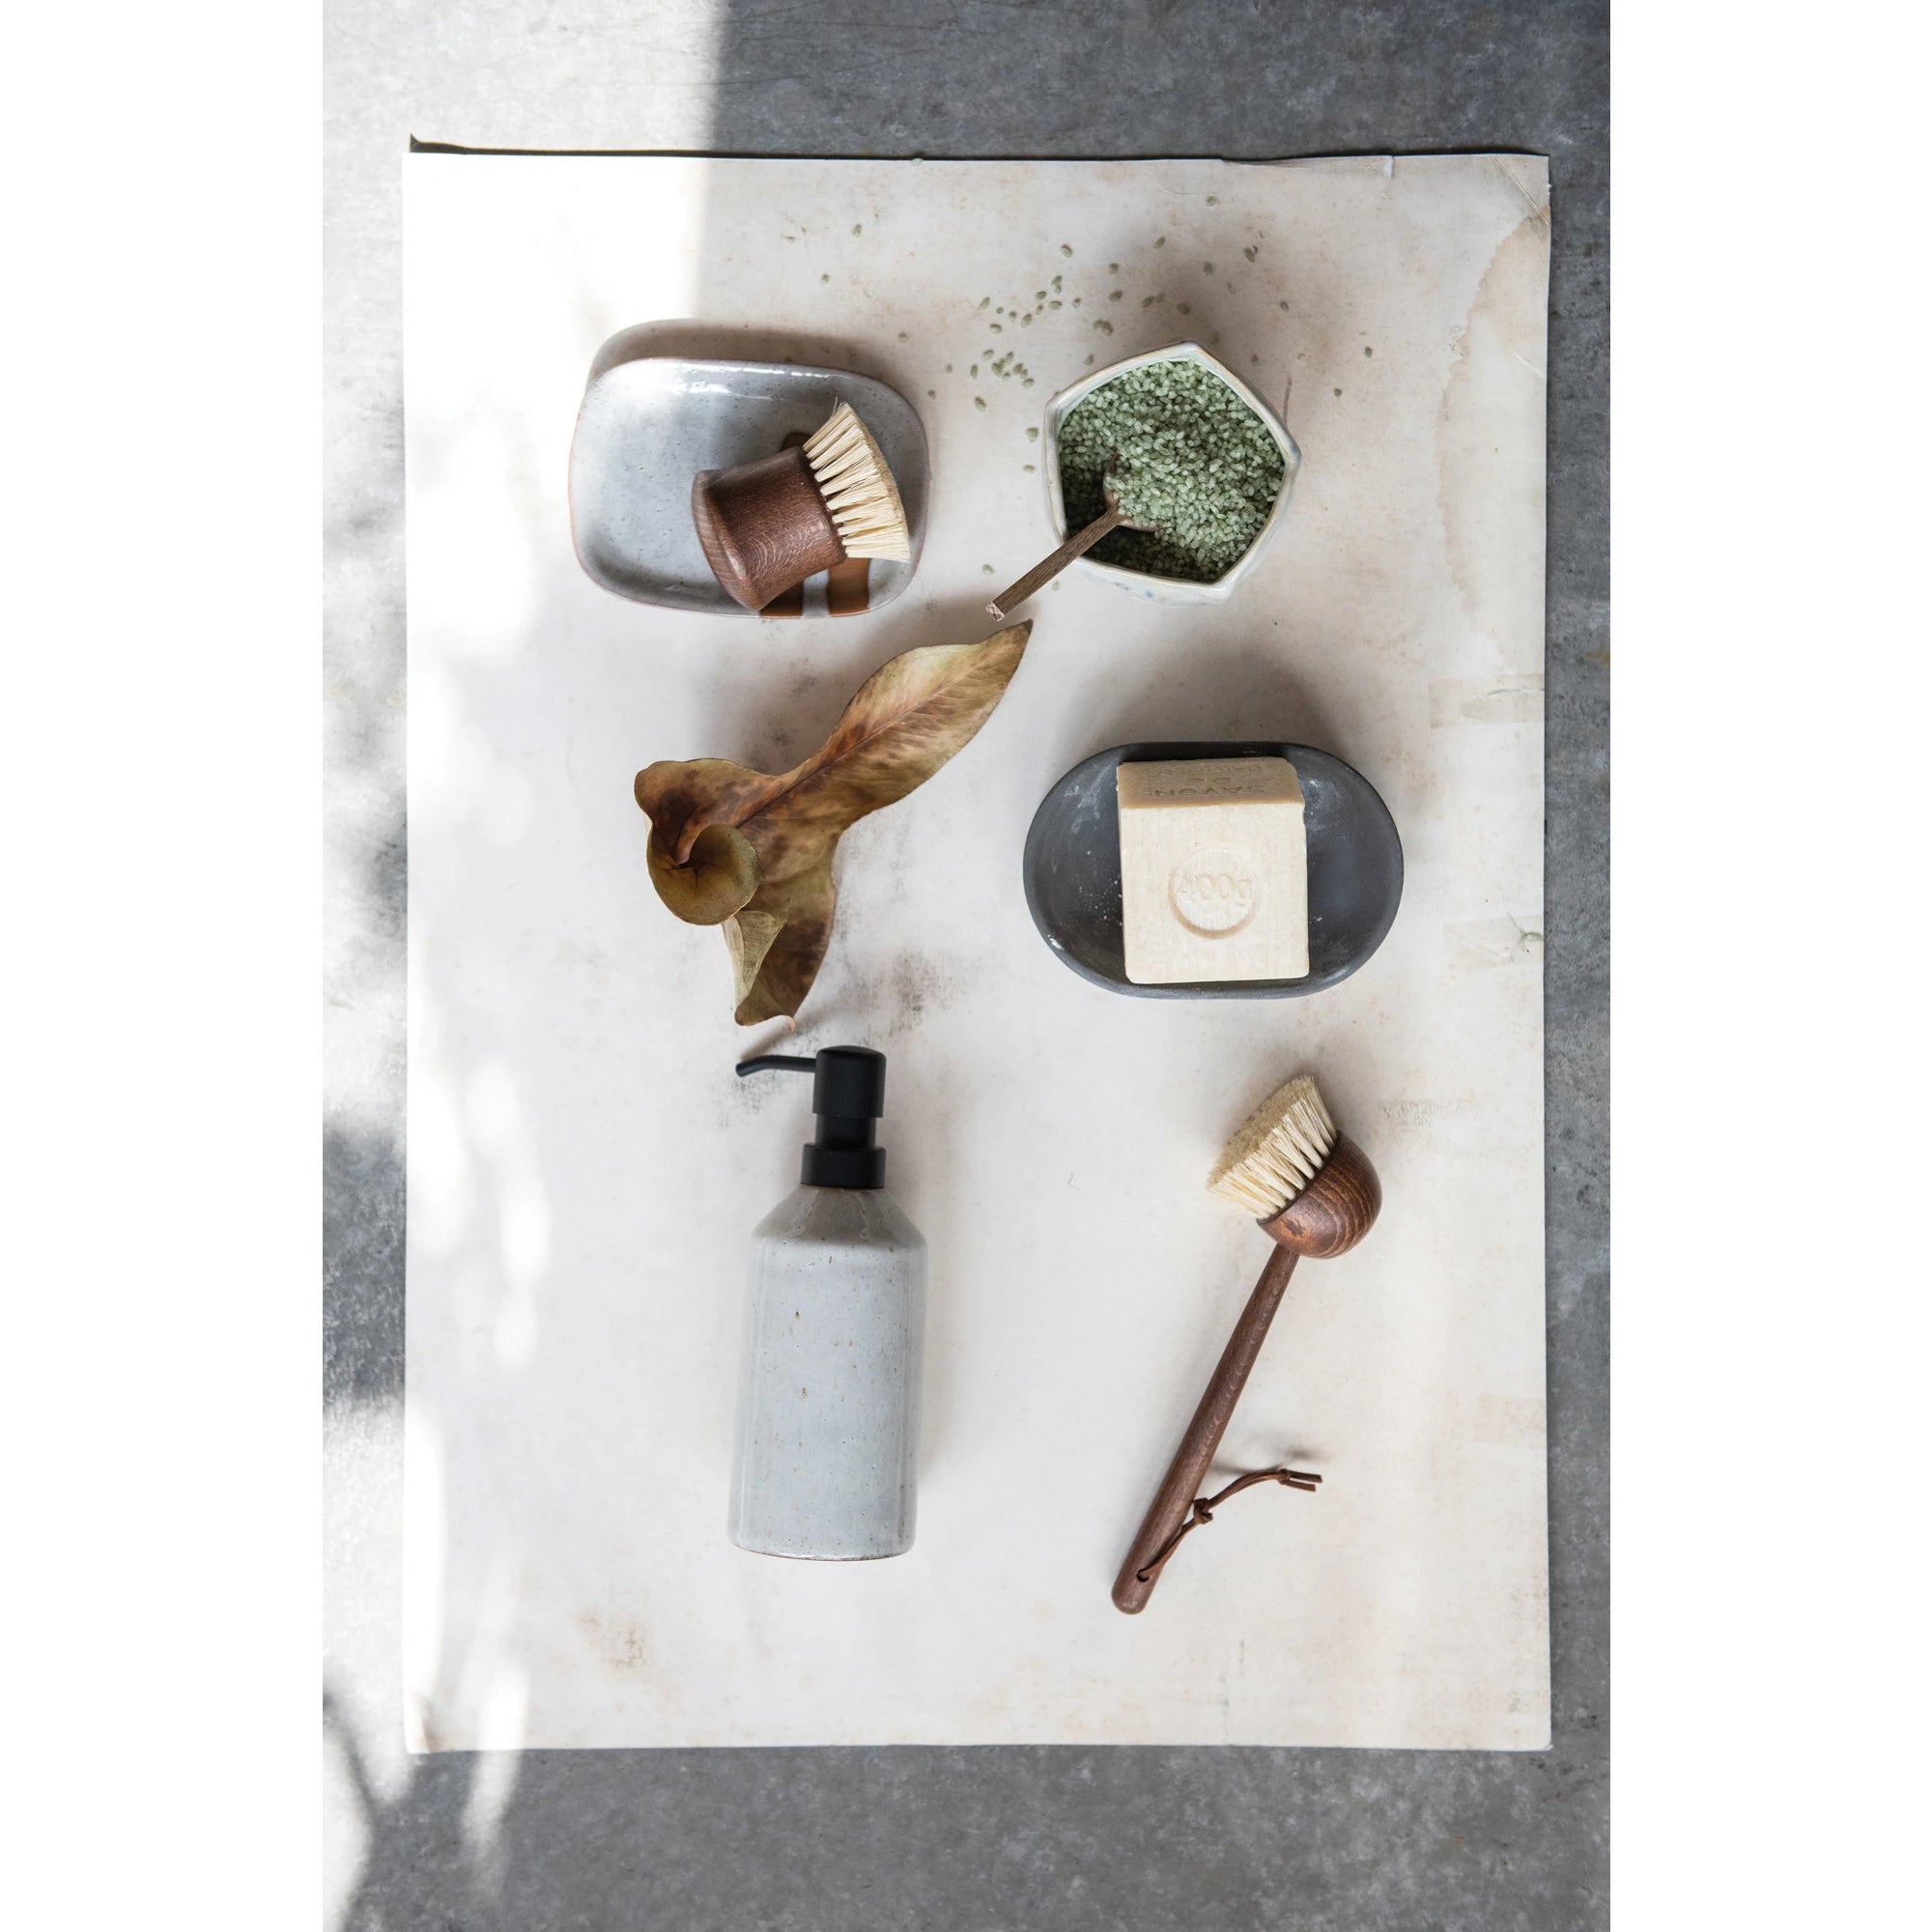 Top view of an assortment of eco-friendly bath products including soap bars, brushes, and liquid soap in stone and metal containers, arranged on a marble surface in a Scottsdale Arizona bungalow.